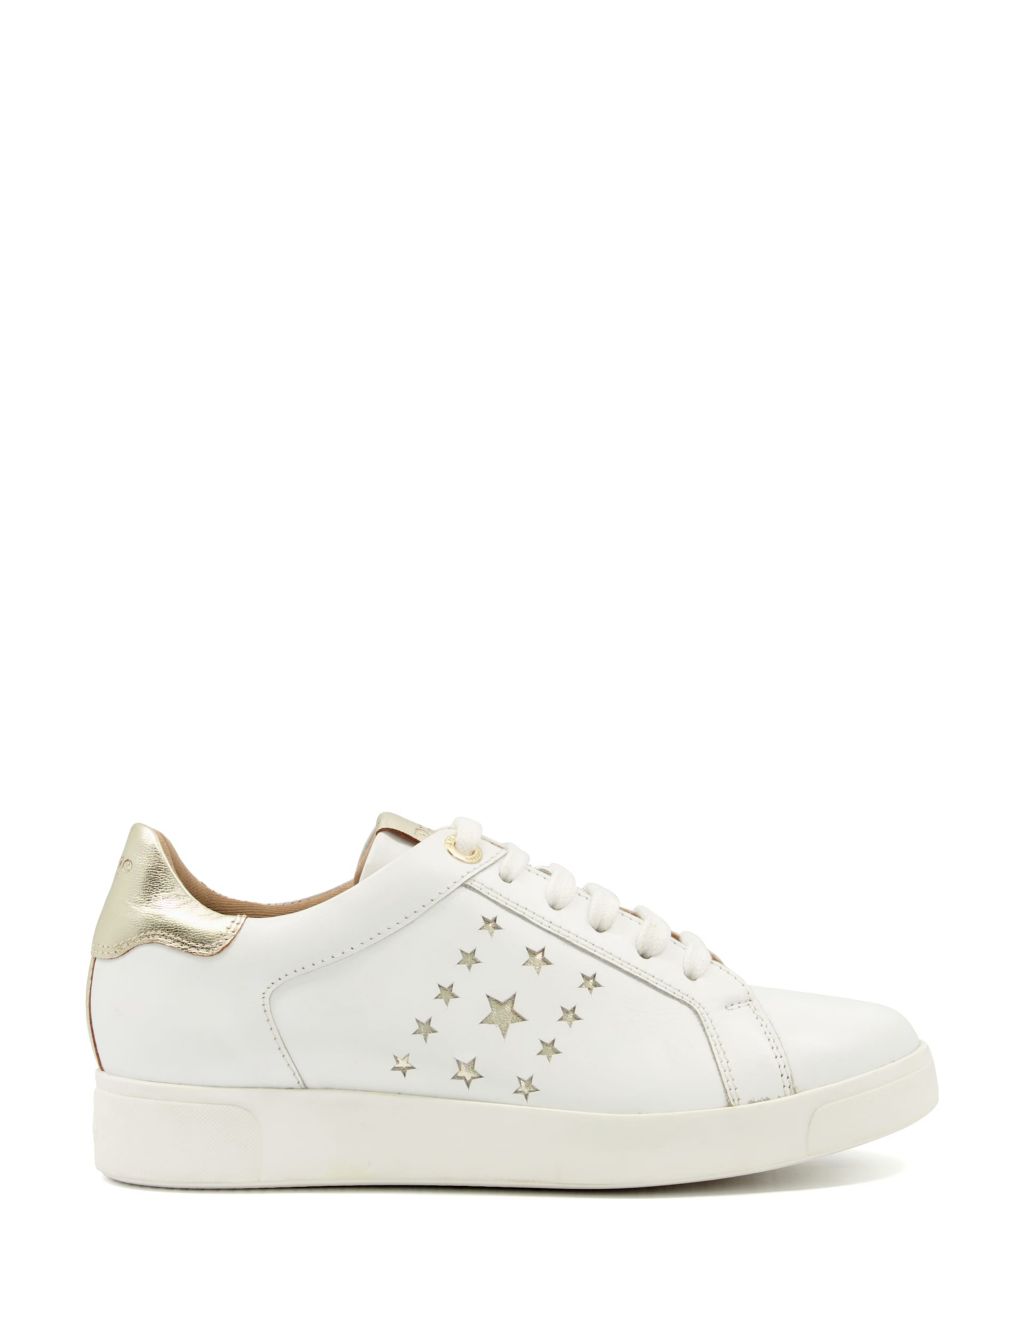 Leather Lace Up Star Trainers image 1